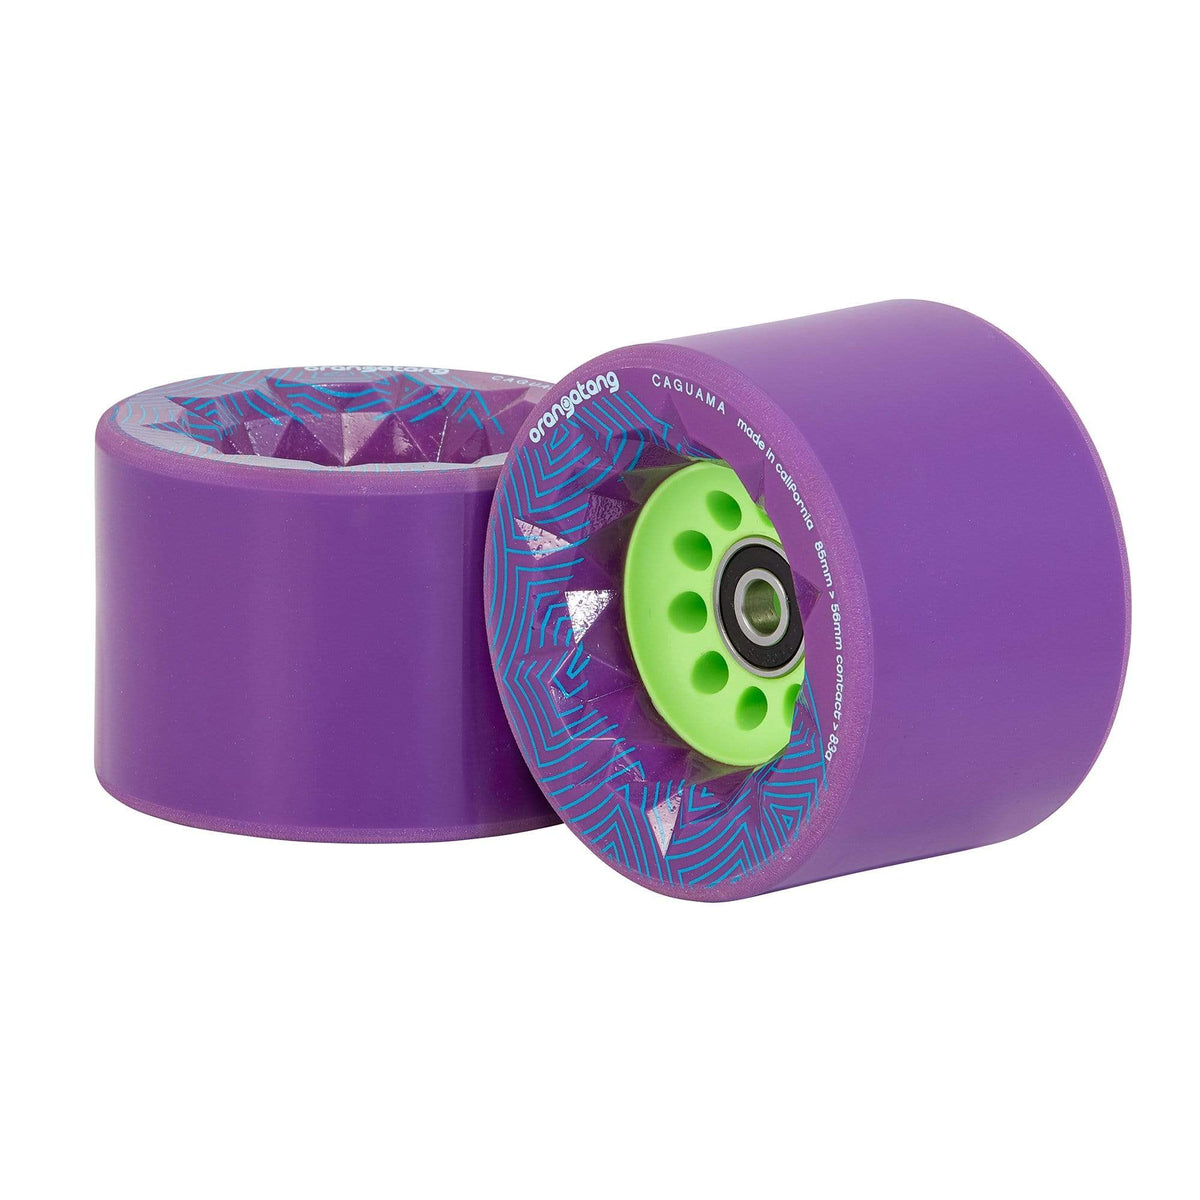 Purple 85mm Loaded Caguama Wheels W/ Pulleys - Boosted USA